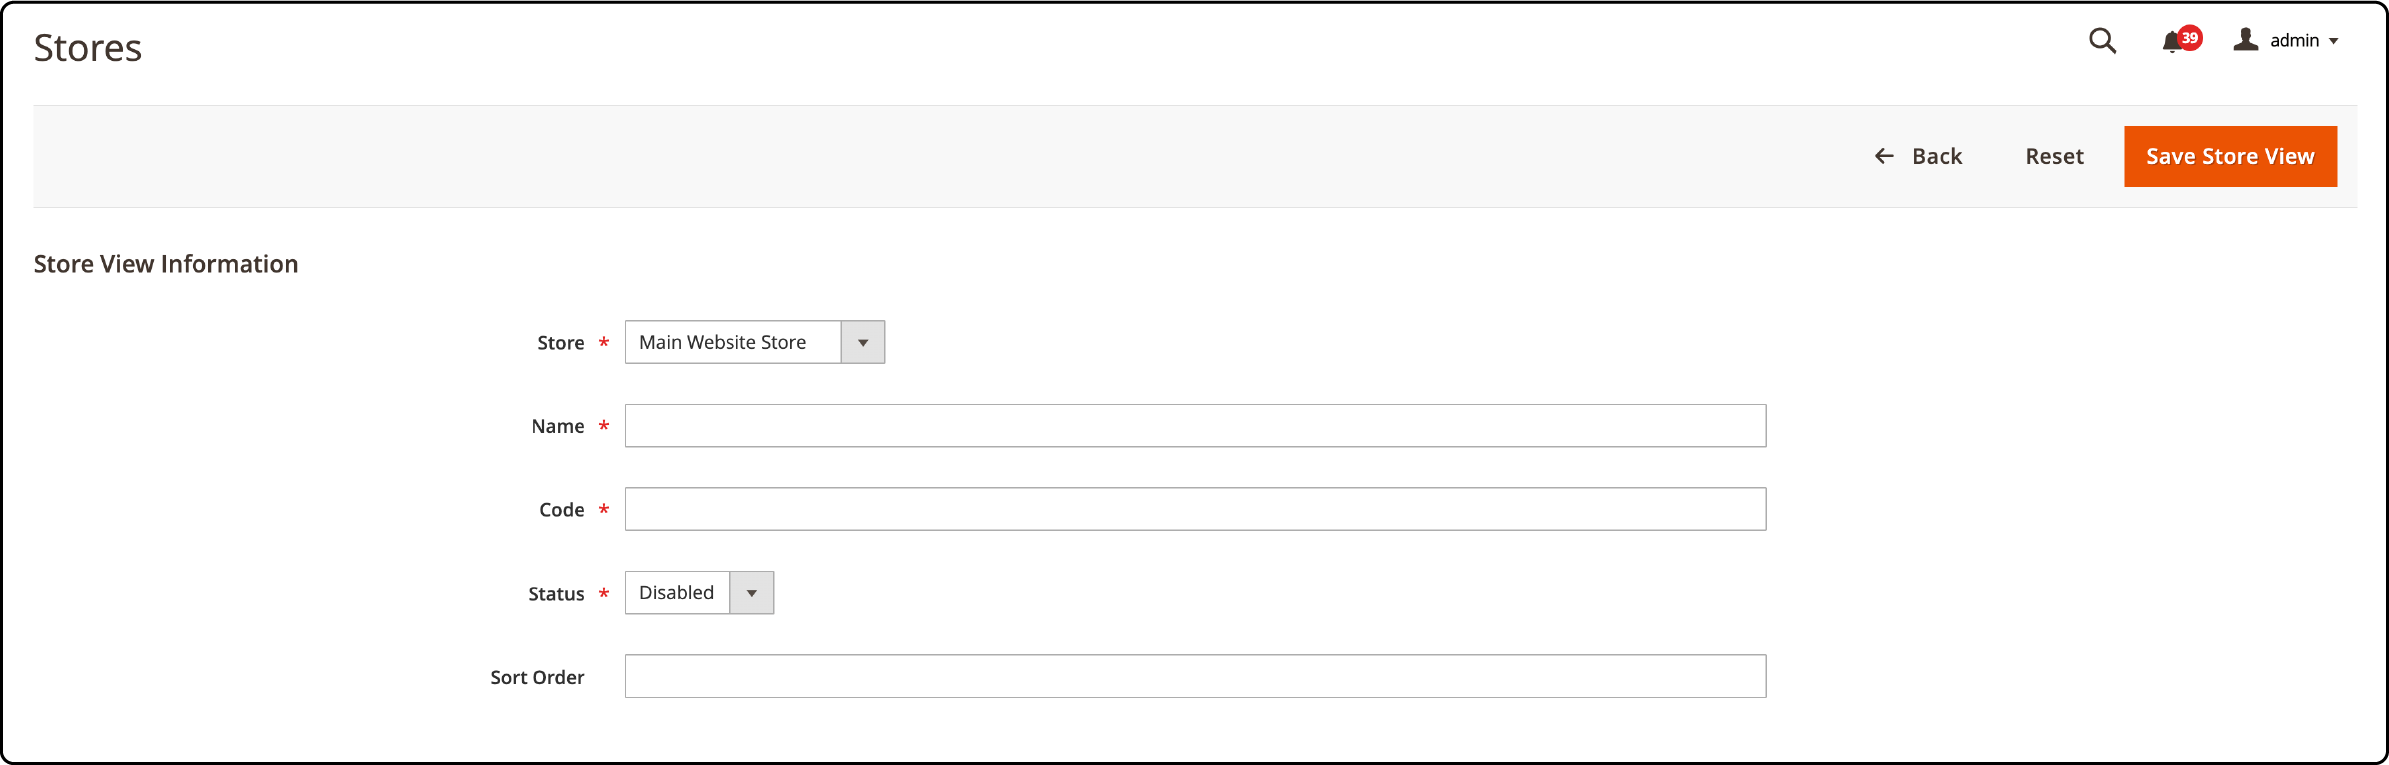 Step 3 in Magento Multi-Store Setup: Adding a New Store View